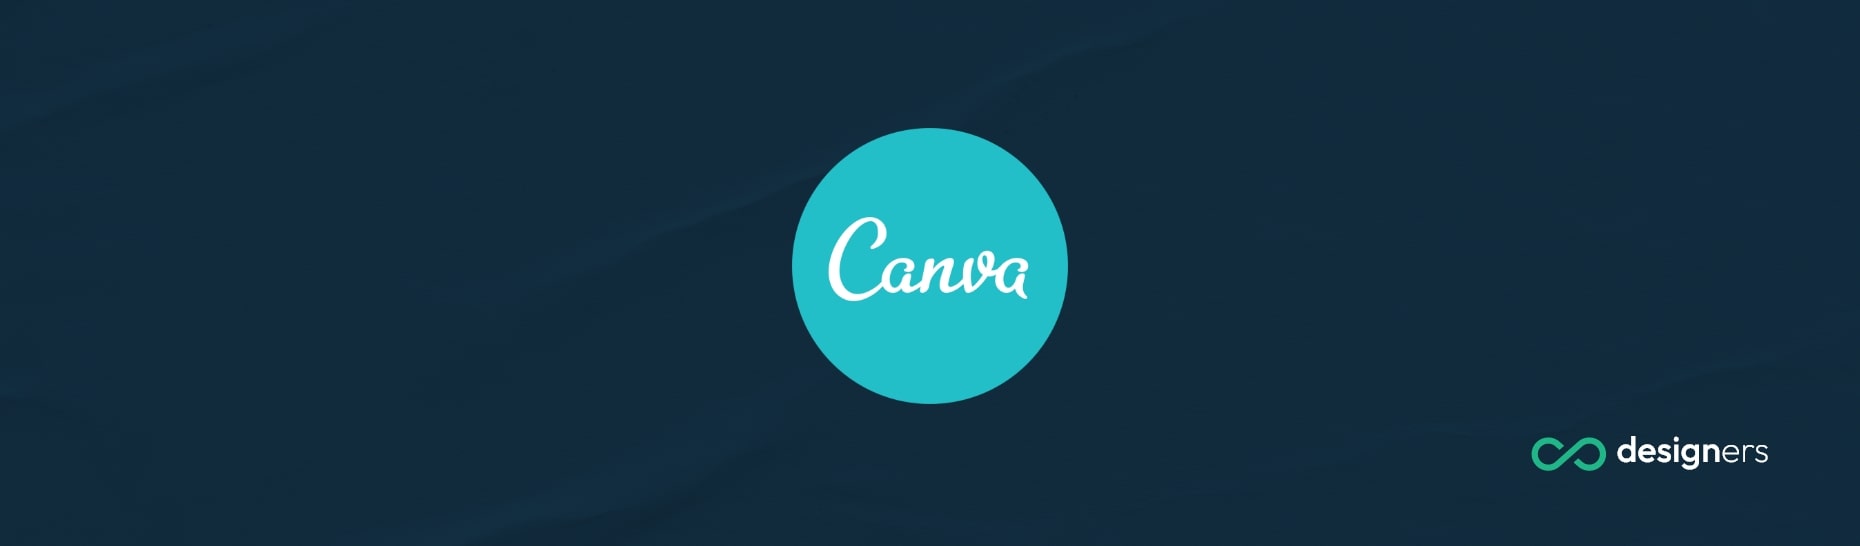 What Is the Rae Dunn Font Called on Canva?